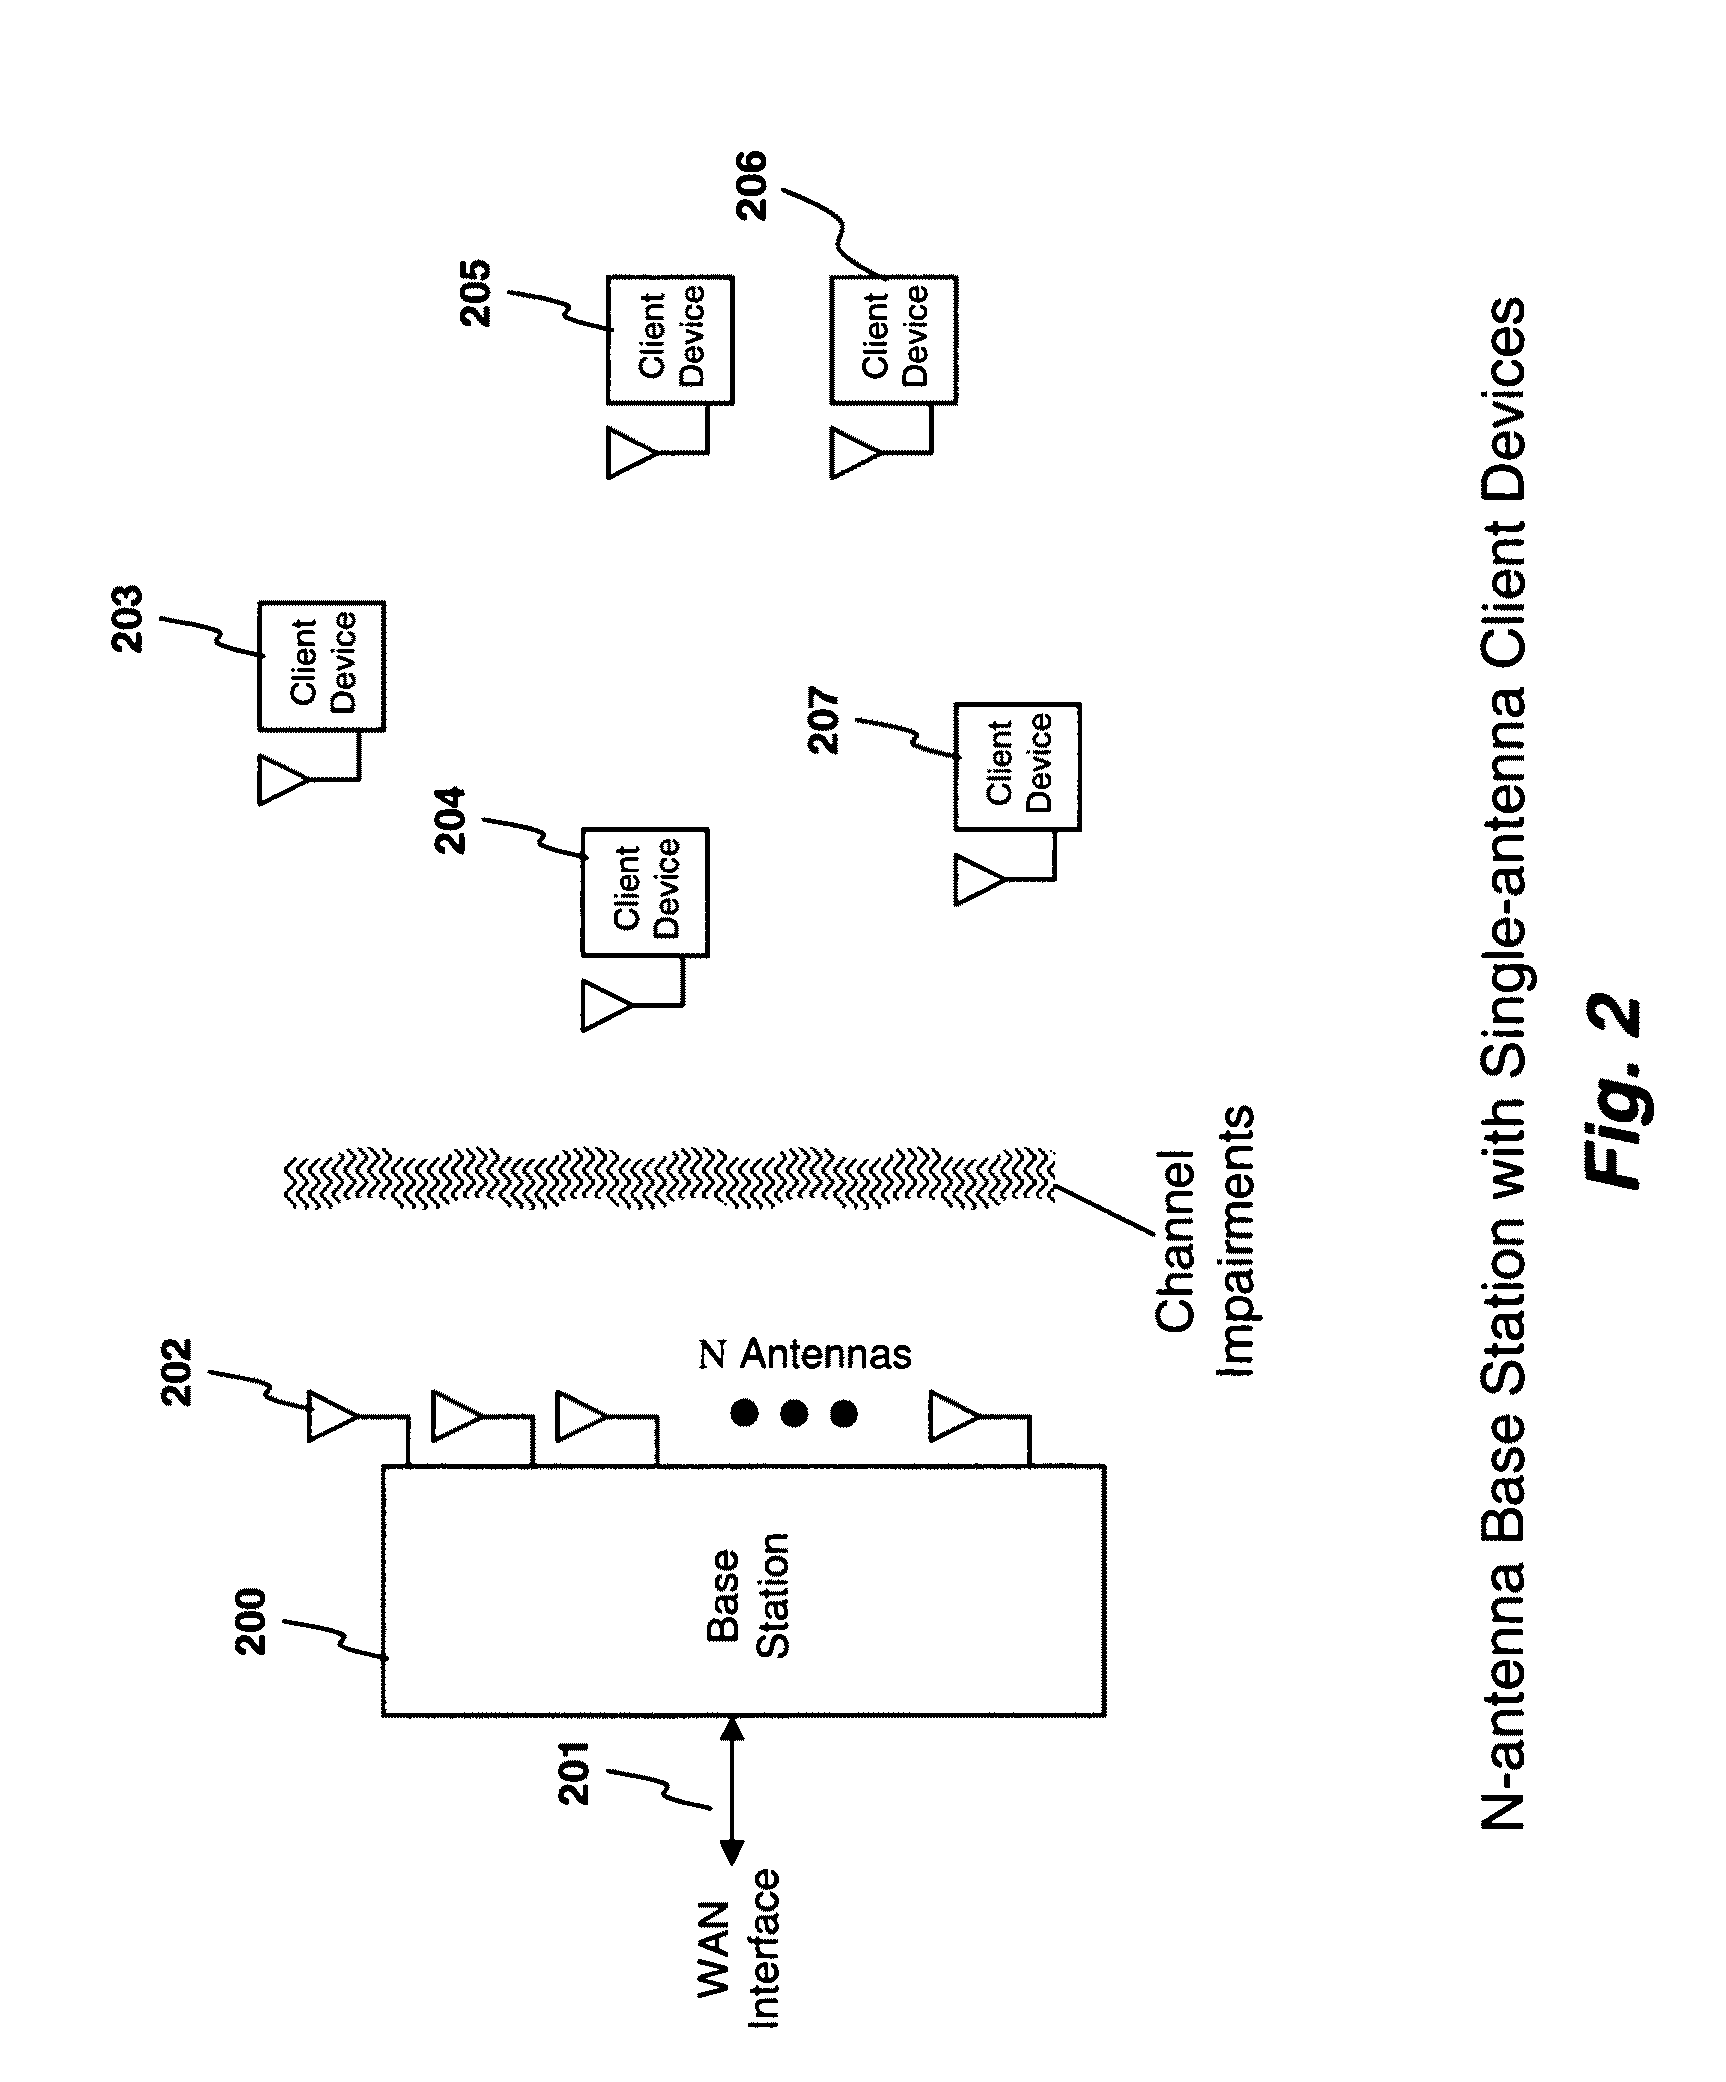 System and method for distributed input distributed output wireless communications